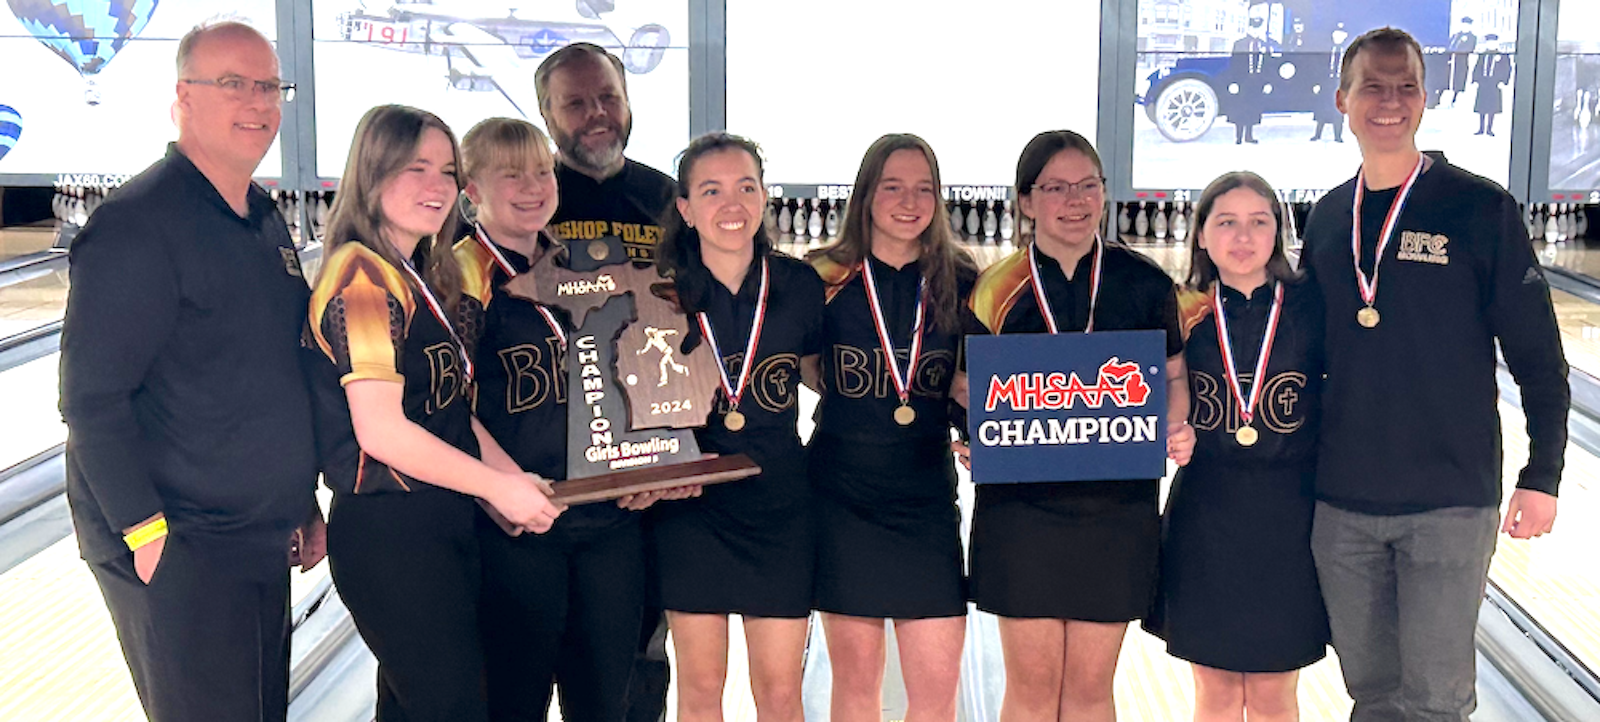 The Madison Heights Bishop Foley girls bowling team won three best-of-five Baker matches to capture the MHSAA’s Division 3 championship, the school’s first in  history. Victory smiles are worn by (from the left) Coach Alan Thibodeau,  senior Isabella Brunt, senior Erica Surratt, Coach Mike Madsen, senior Madelyn Kubacki, sophomore Jacey Thibodeau, freshman Teresa Schudt, freshman Charlotte Grems, and Head Coach Bradford Grems. (Photo courtesy of MHSAA.com)